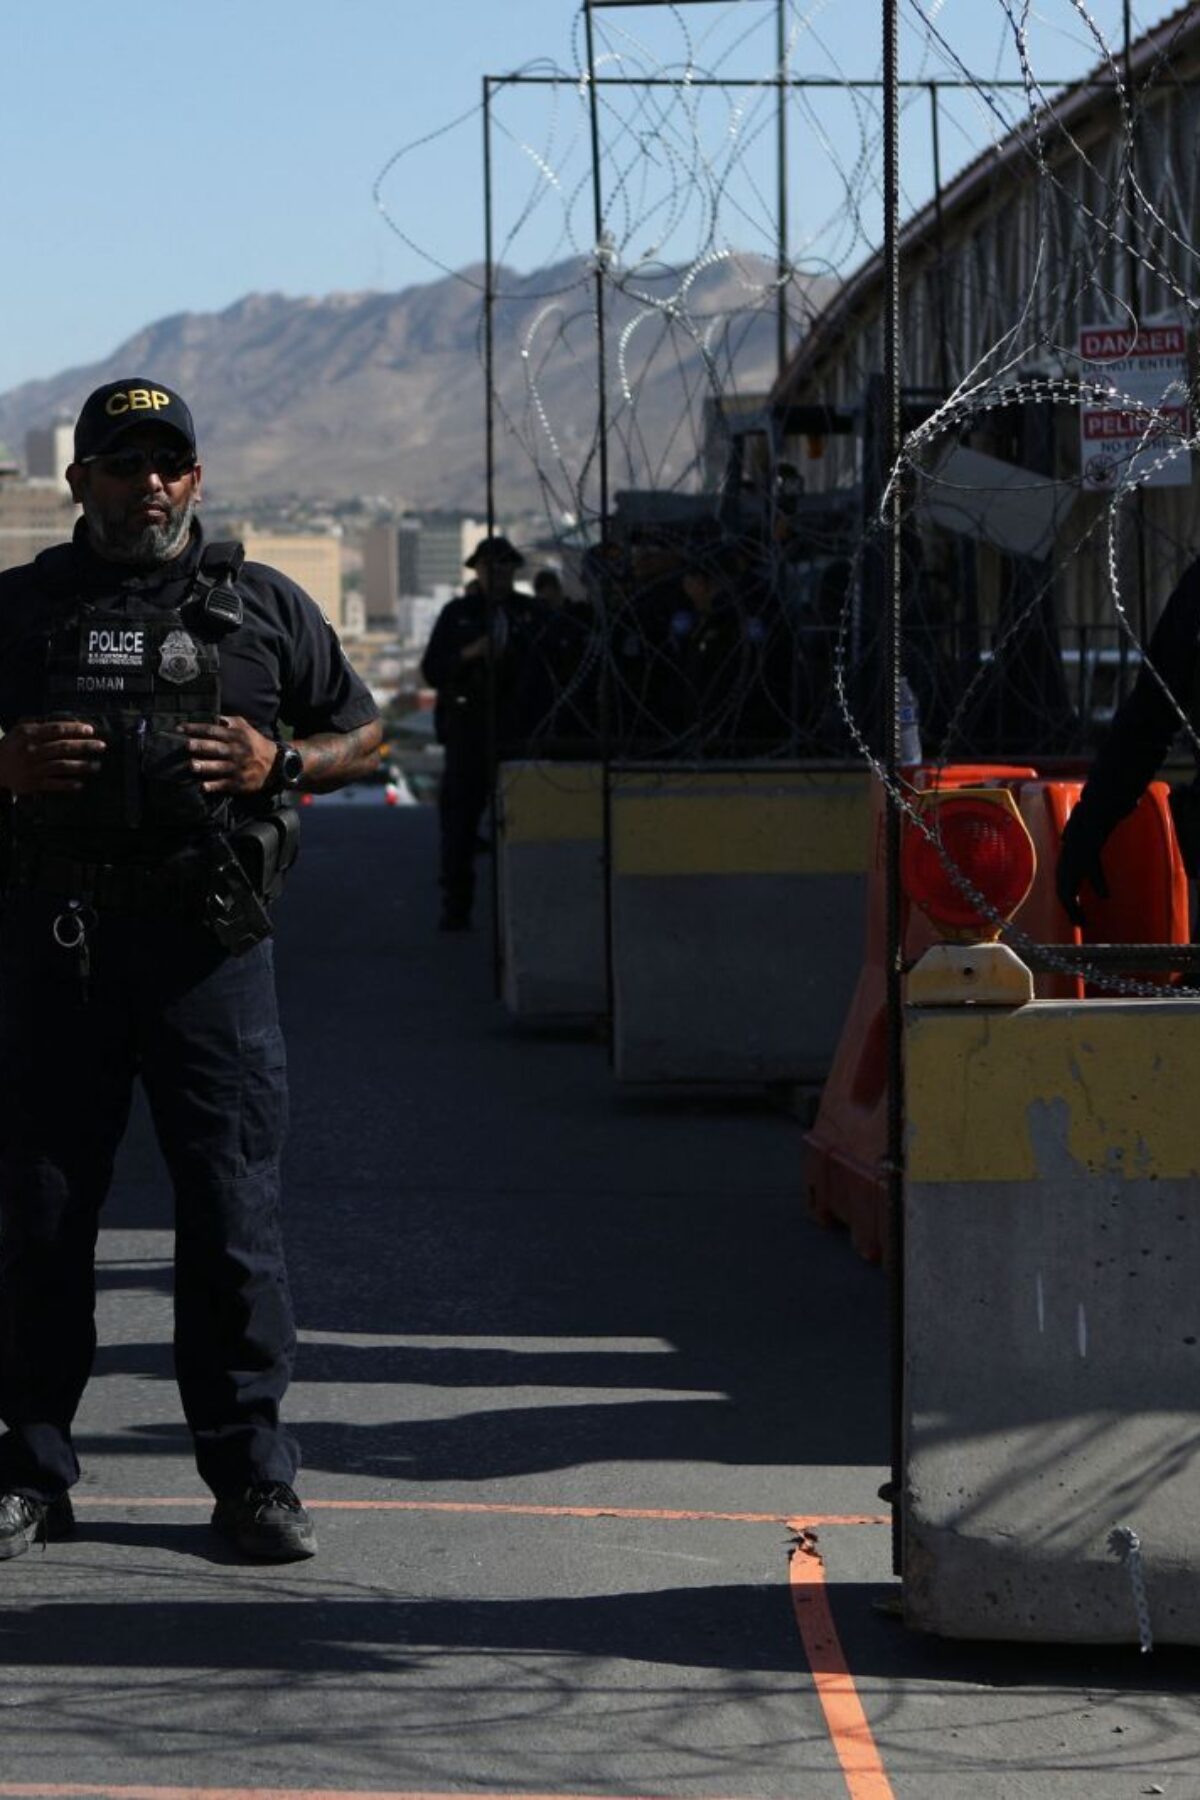 US Customs and Border Protection agents guard the Paso del Norte - Santa Fe International Bridge in Ciudad Juarez, Chihuahua state, Mexico that connects to El Paso, Texas on May 12, 2023. The United States bolted tough new immigration policies into place Friday, setting up an uncertain future for desperate migrants reaching its southern border as a top official expressed confidence the system will hold. Tens of thousands of people were expected to try to cross into the United States in coming days after it lifted pandemic-era rules, hoping to escape the poverty and criminal gangs wracking their own countries in what the United Nations called an 